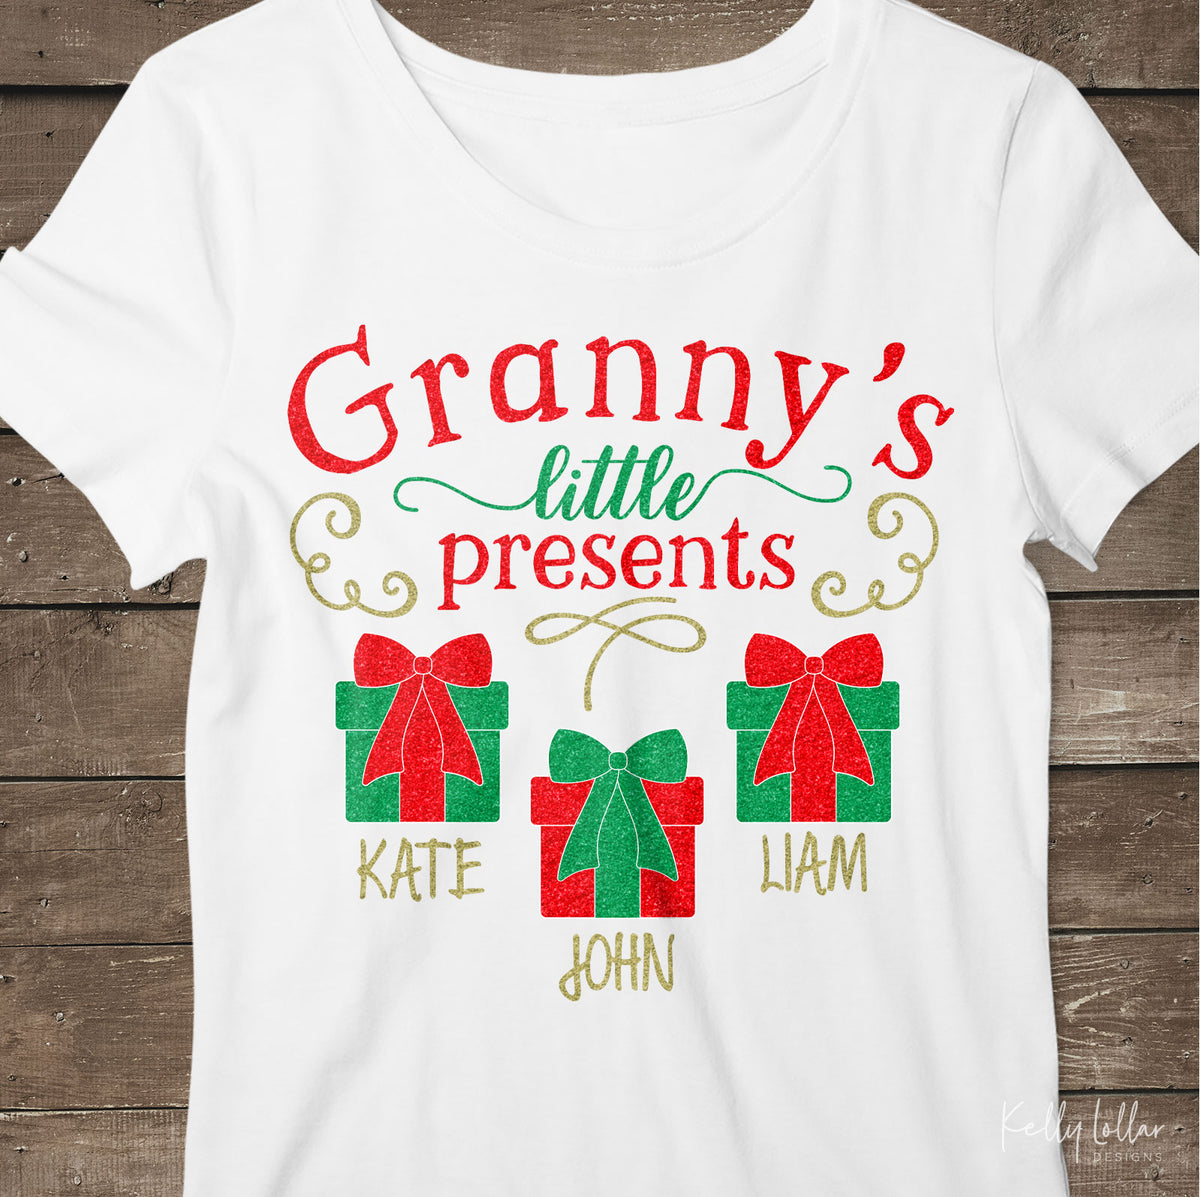 Granny&#39;s Little Presents| Christmas Shirt Design for Granny with Gift Boxes for Children&#39;s Names | SVG DXF PNG Cut Files